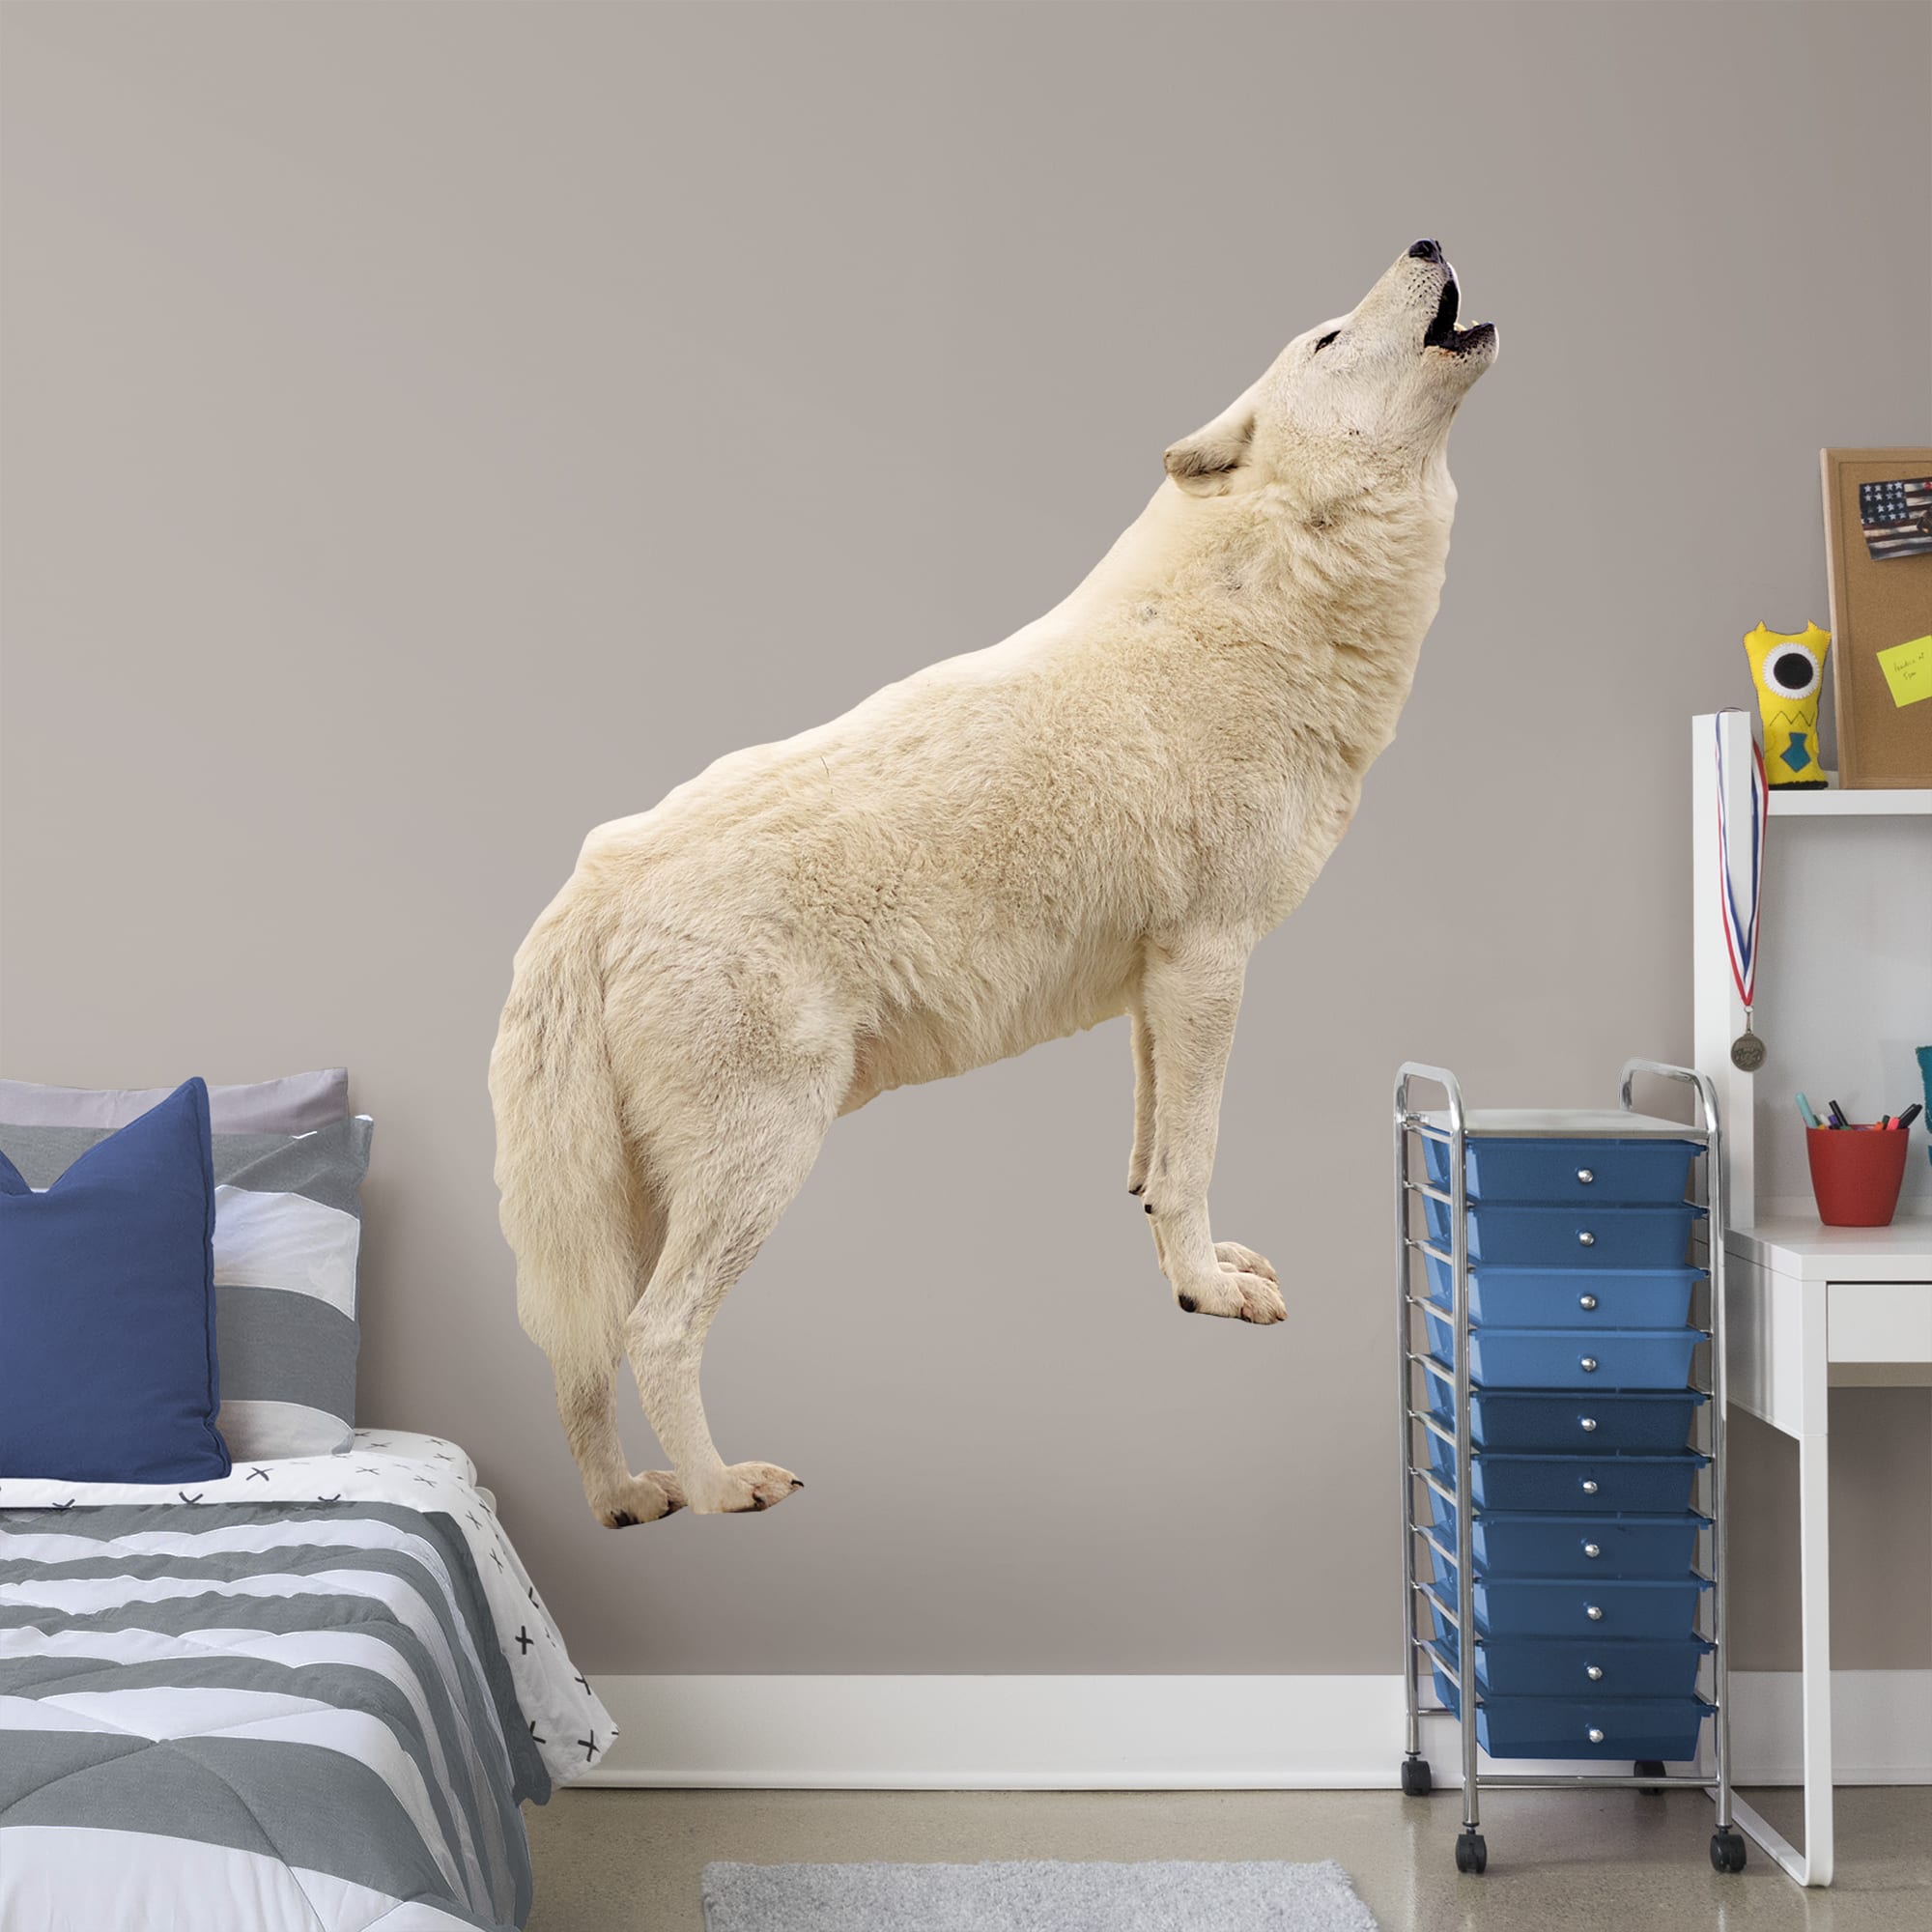 Howling Wolf - Removable Vinyl Decal Life-Size Animal + 2 Decals (53"W x 68"H) by Fathead